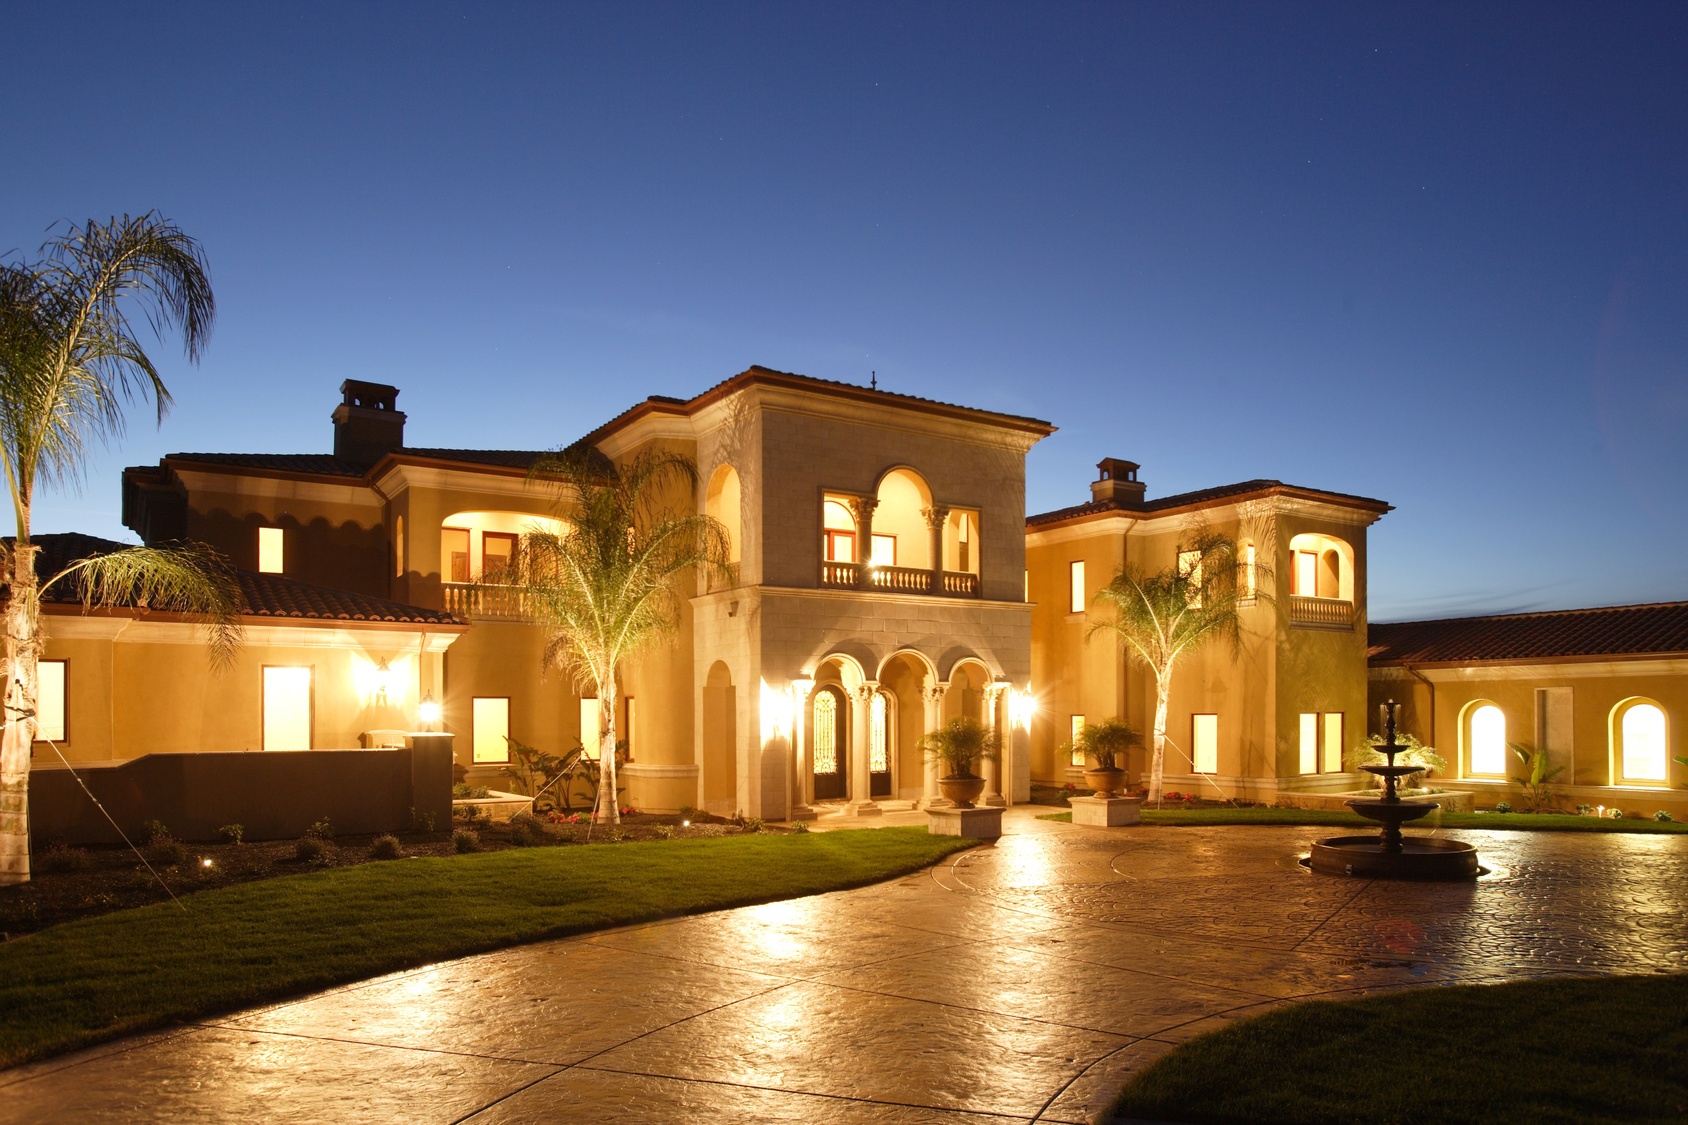 Download this Orlando Most Expensive Homes For Sale picture